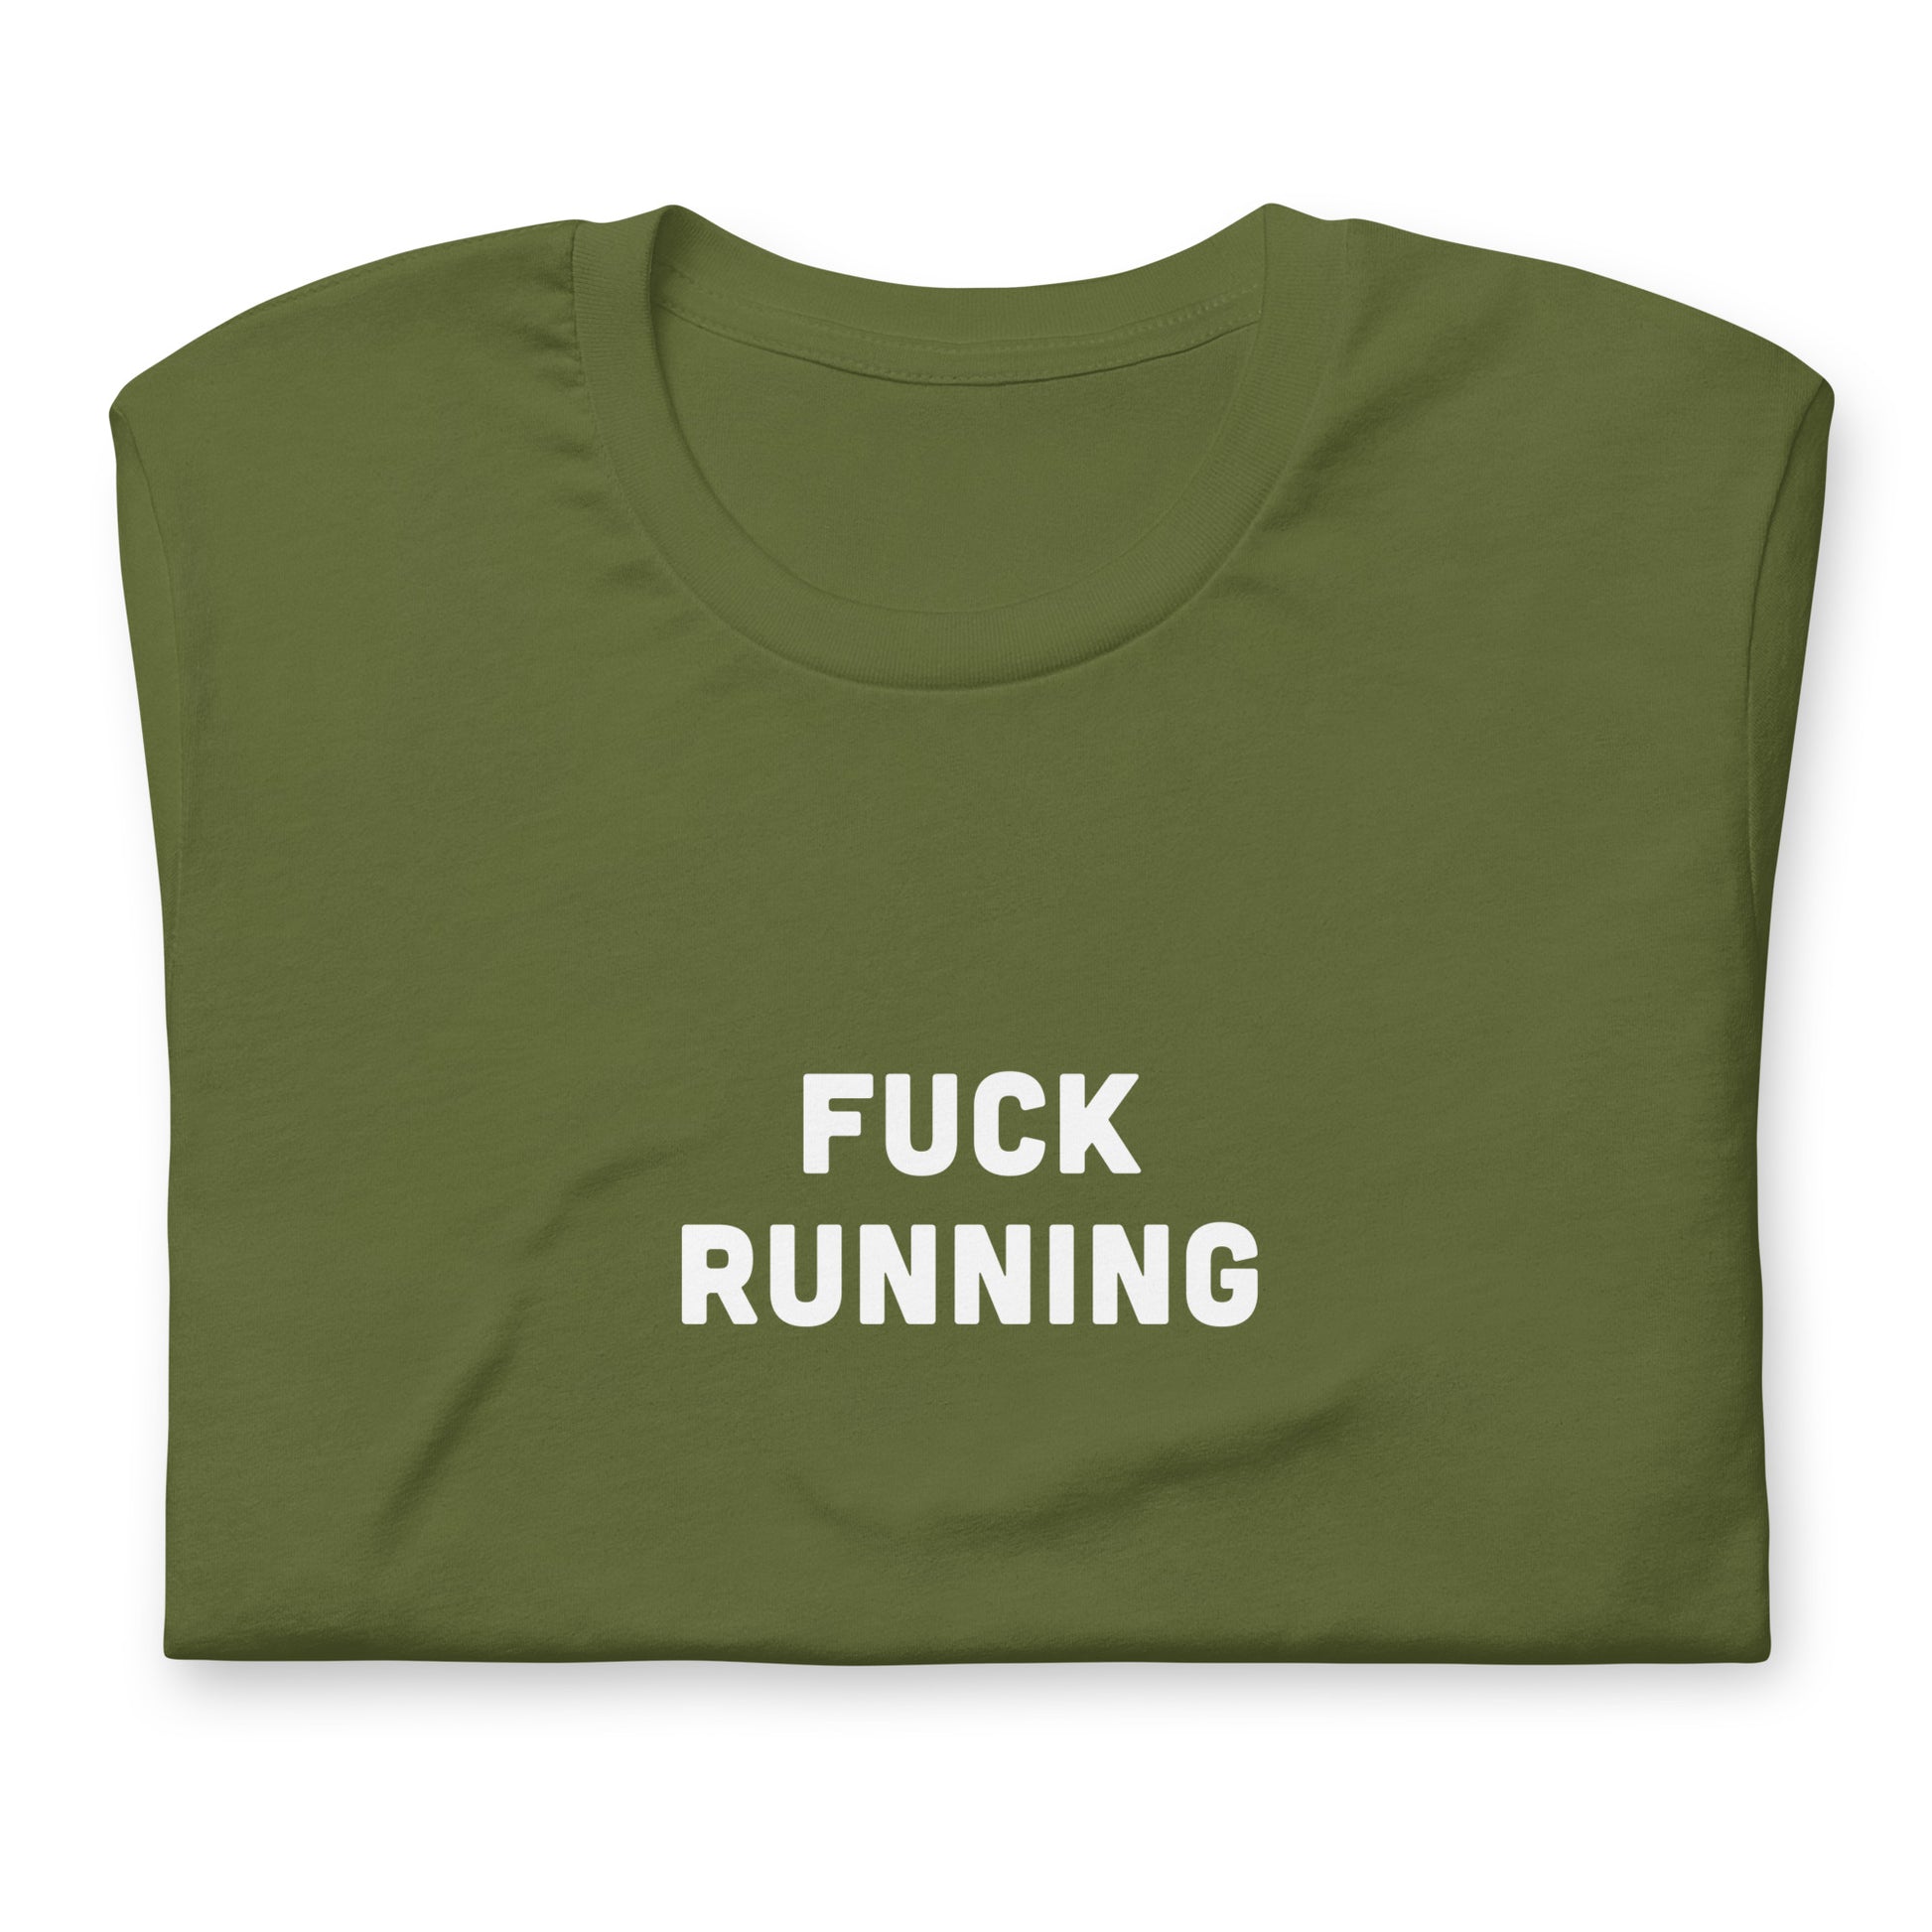 Fuck Running T-Shirt Size S Color Navy